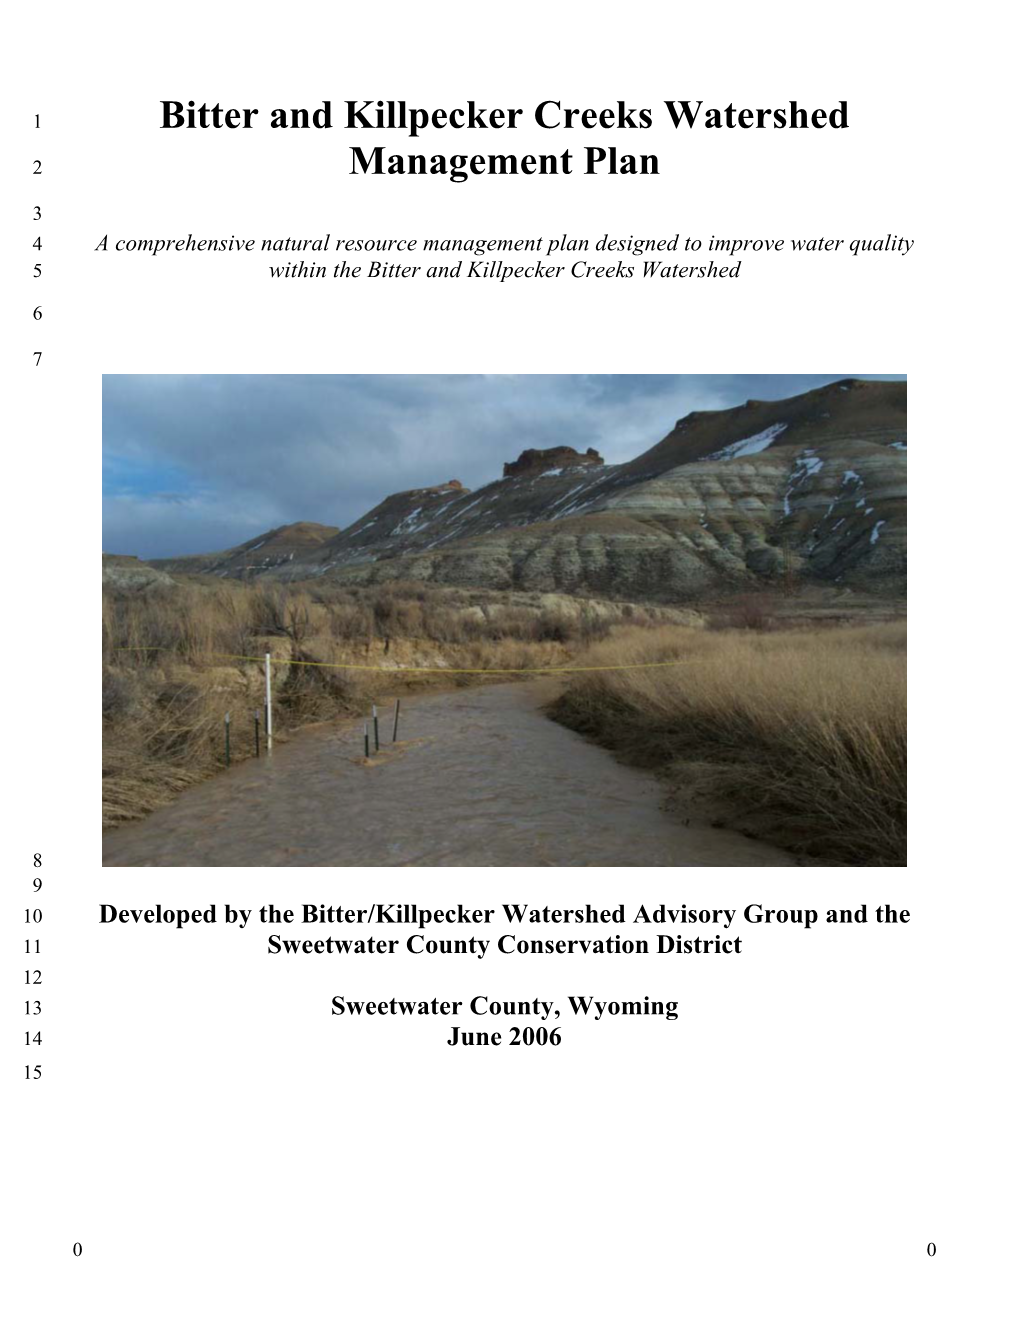 Bitter and Killpecker Creeks Watershed Management Plan